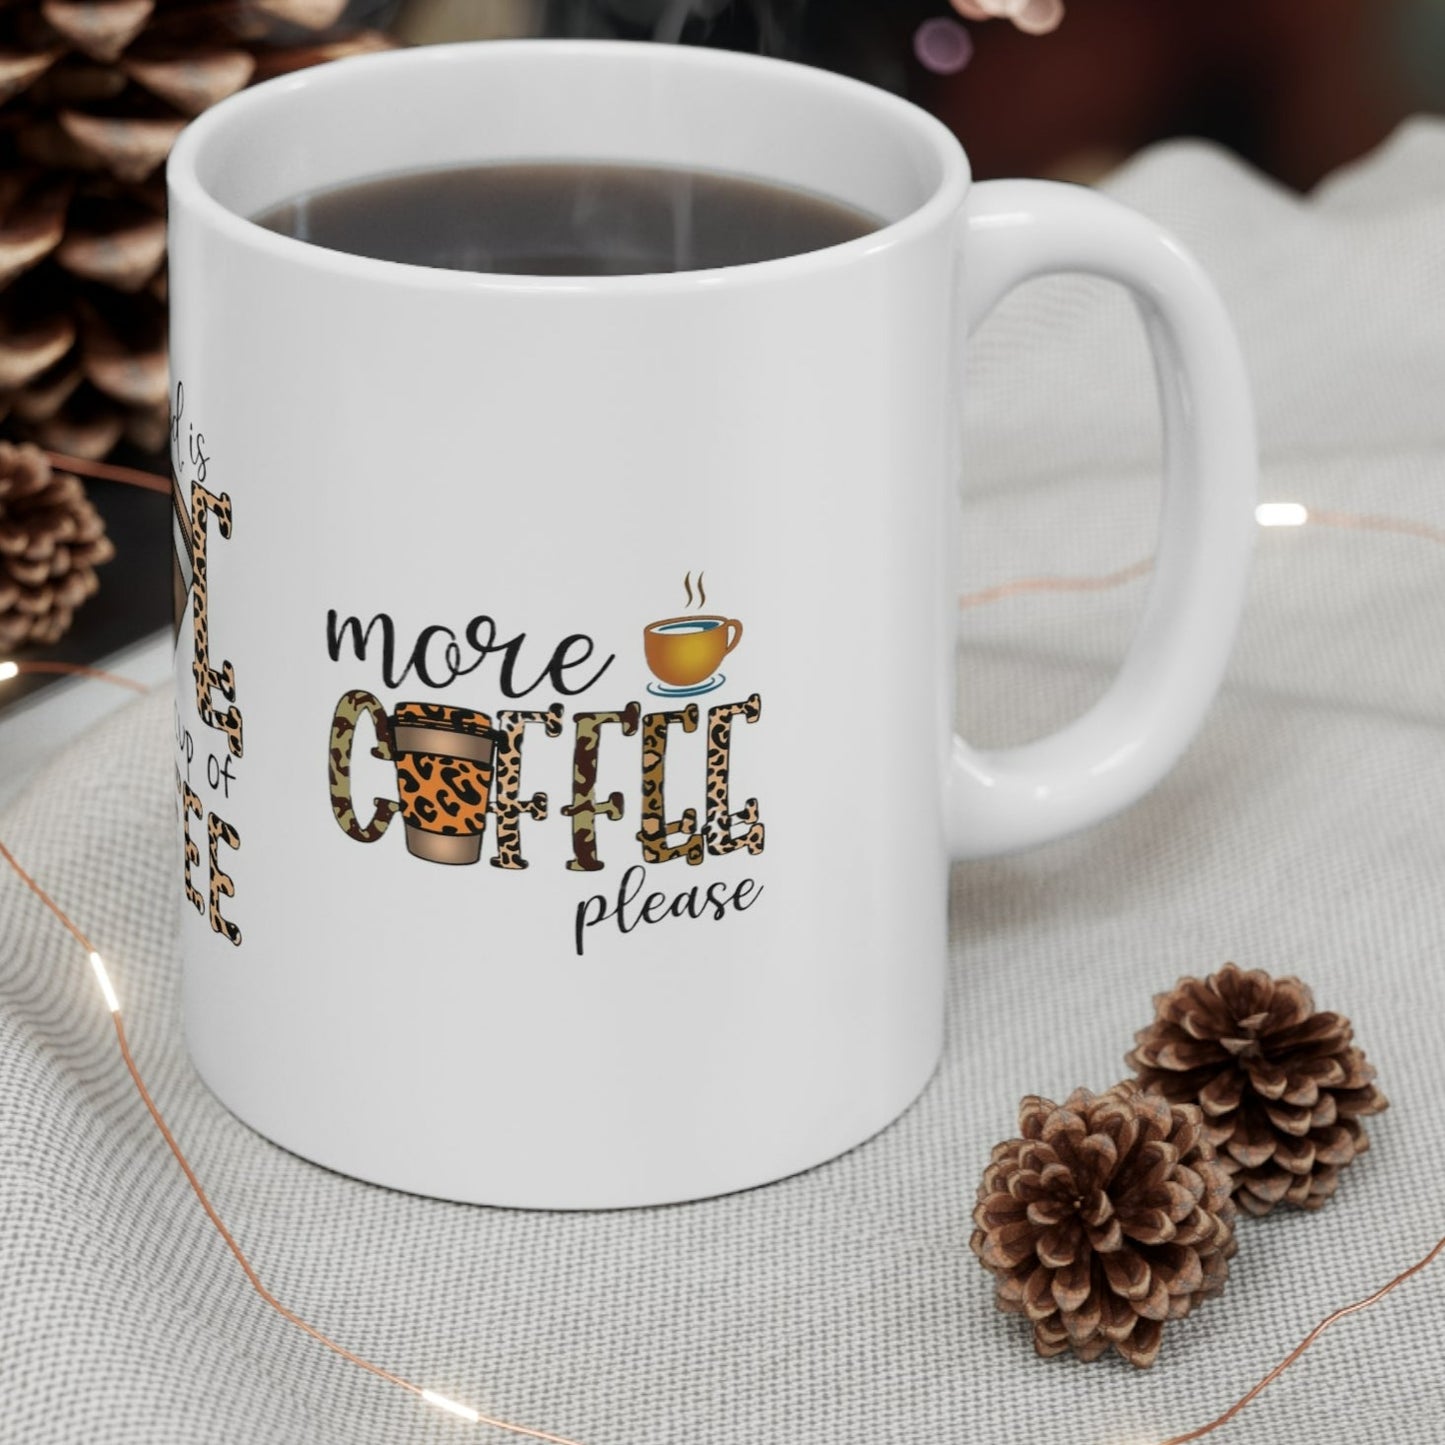 COFFEE LOVERS OFFICIAL MUG - Special Edition Three Messages in One Mug - MUGSCITY 23 - Free Shipping